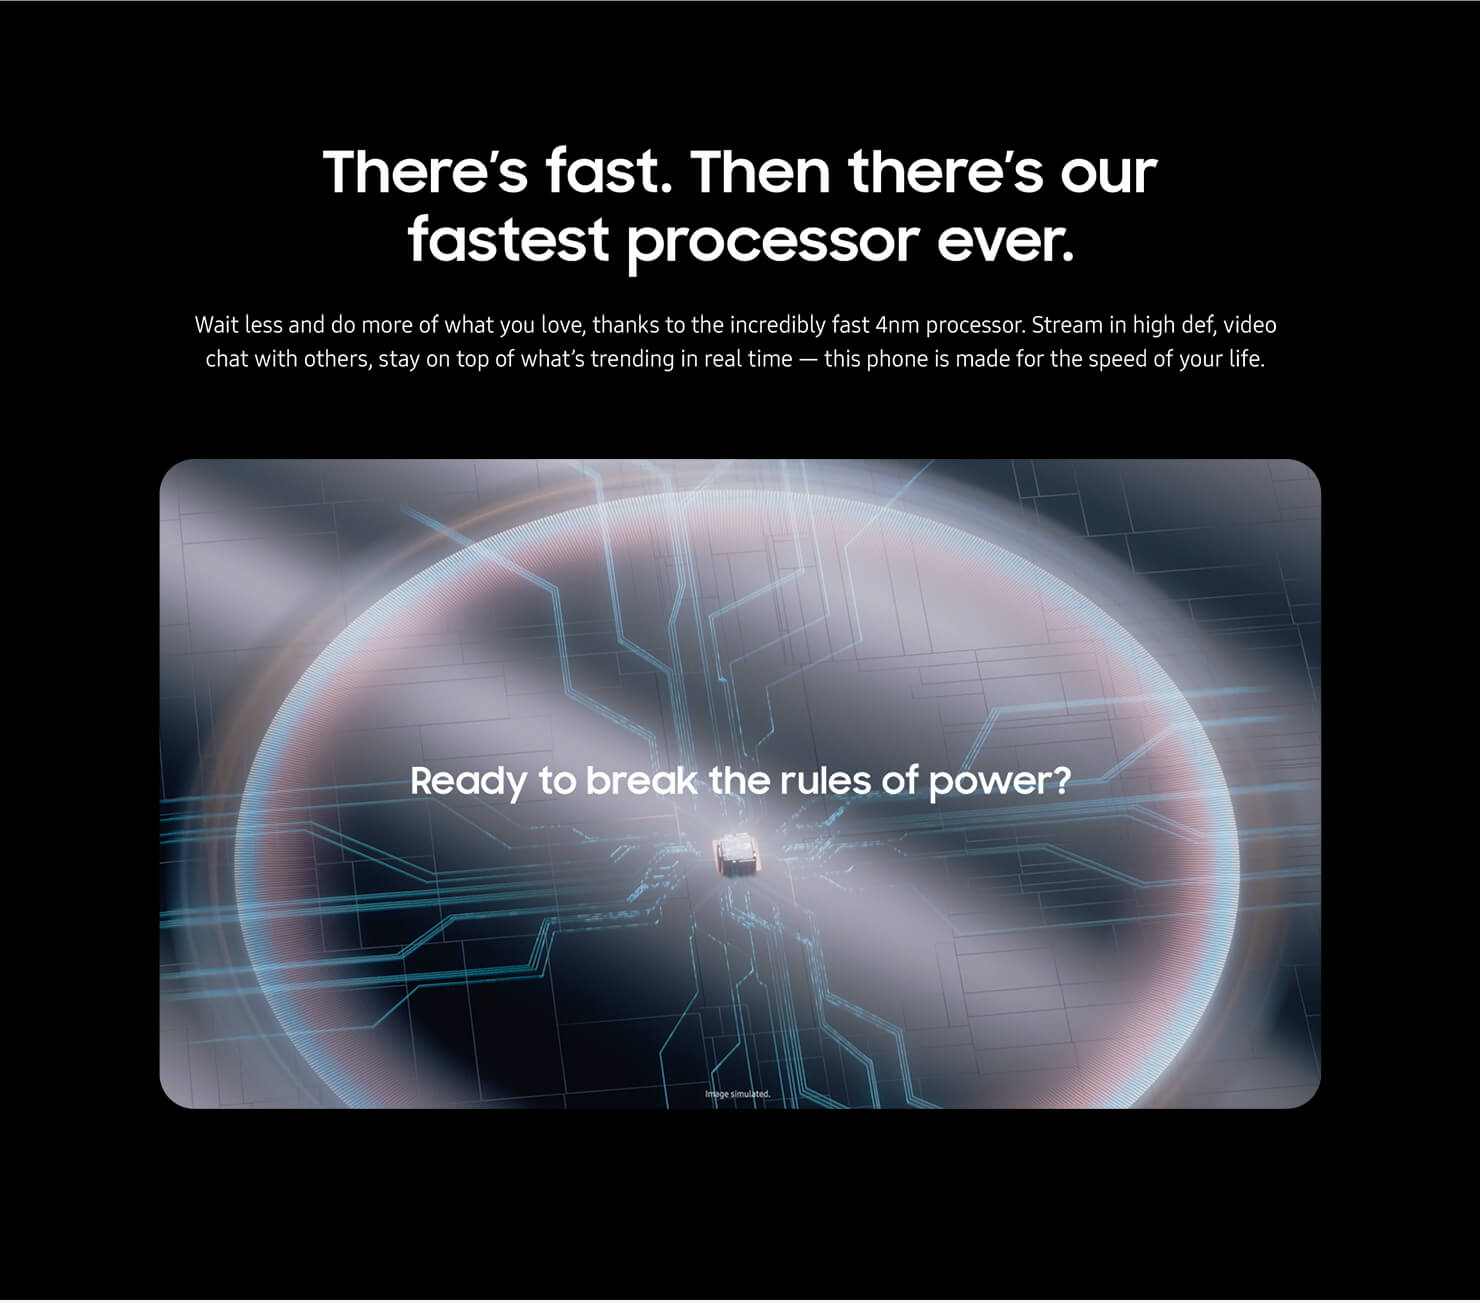 A leaked piece of Samsung Galaxy S22 promotional material, showing a render of the S22's new 4-nanometre chipset